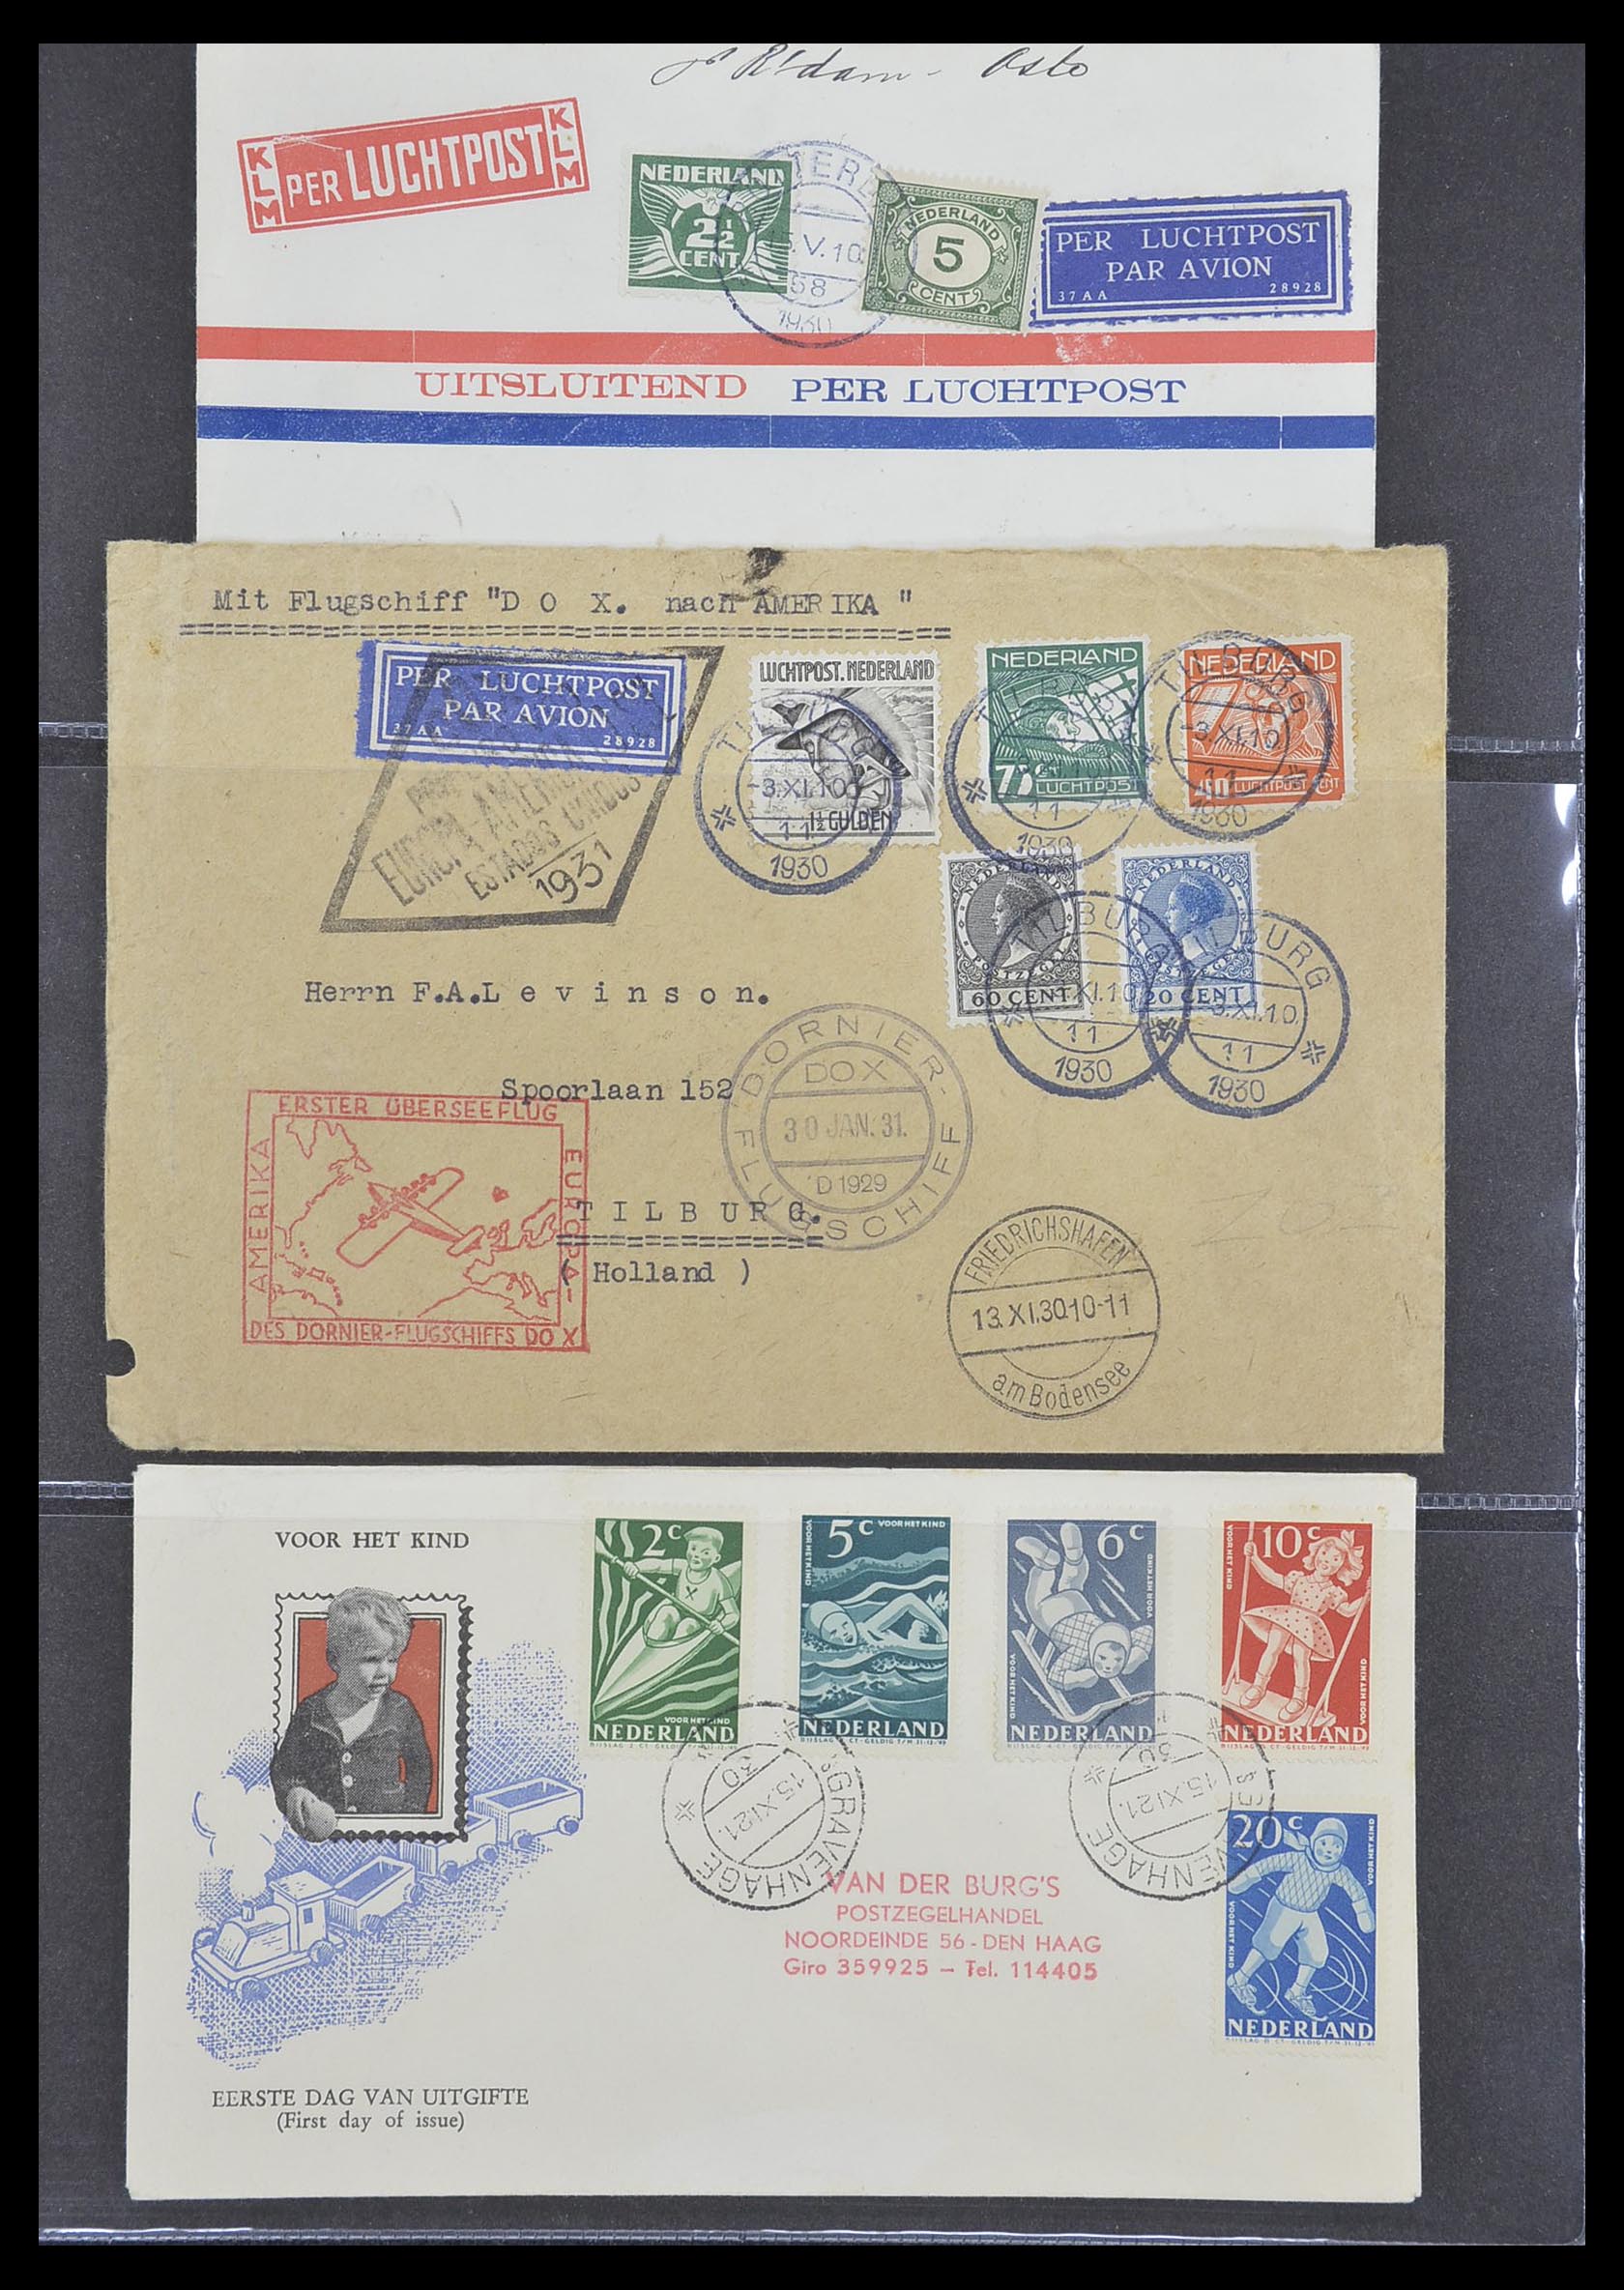 33330 095 - Stamp collection 33330 Netherlands covers 1852-1959.